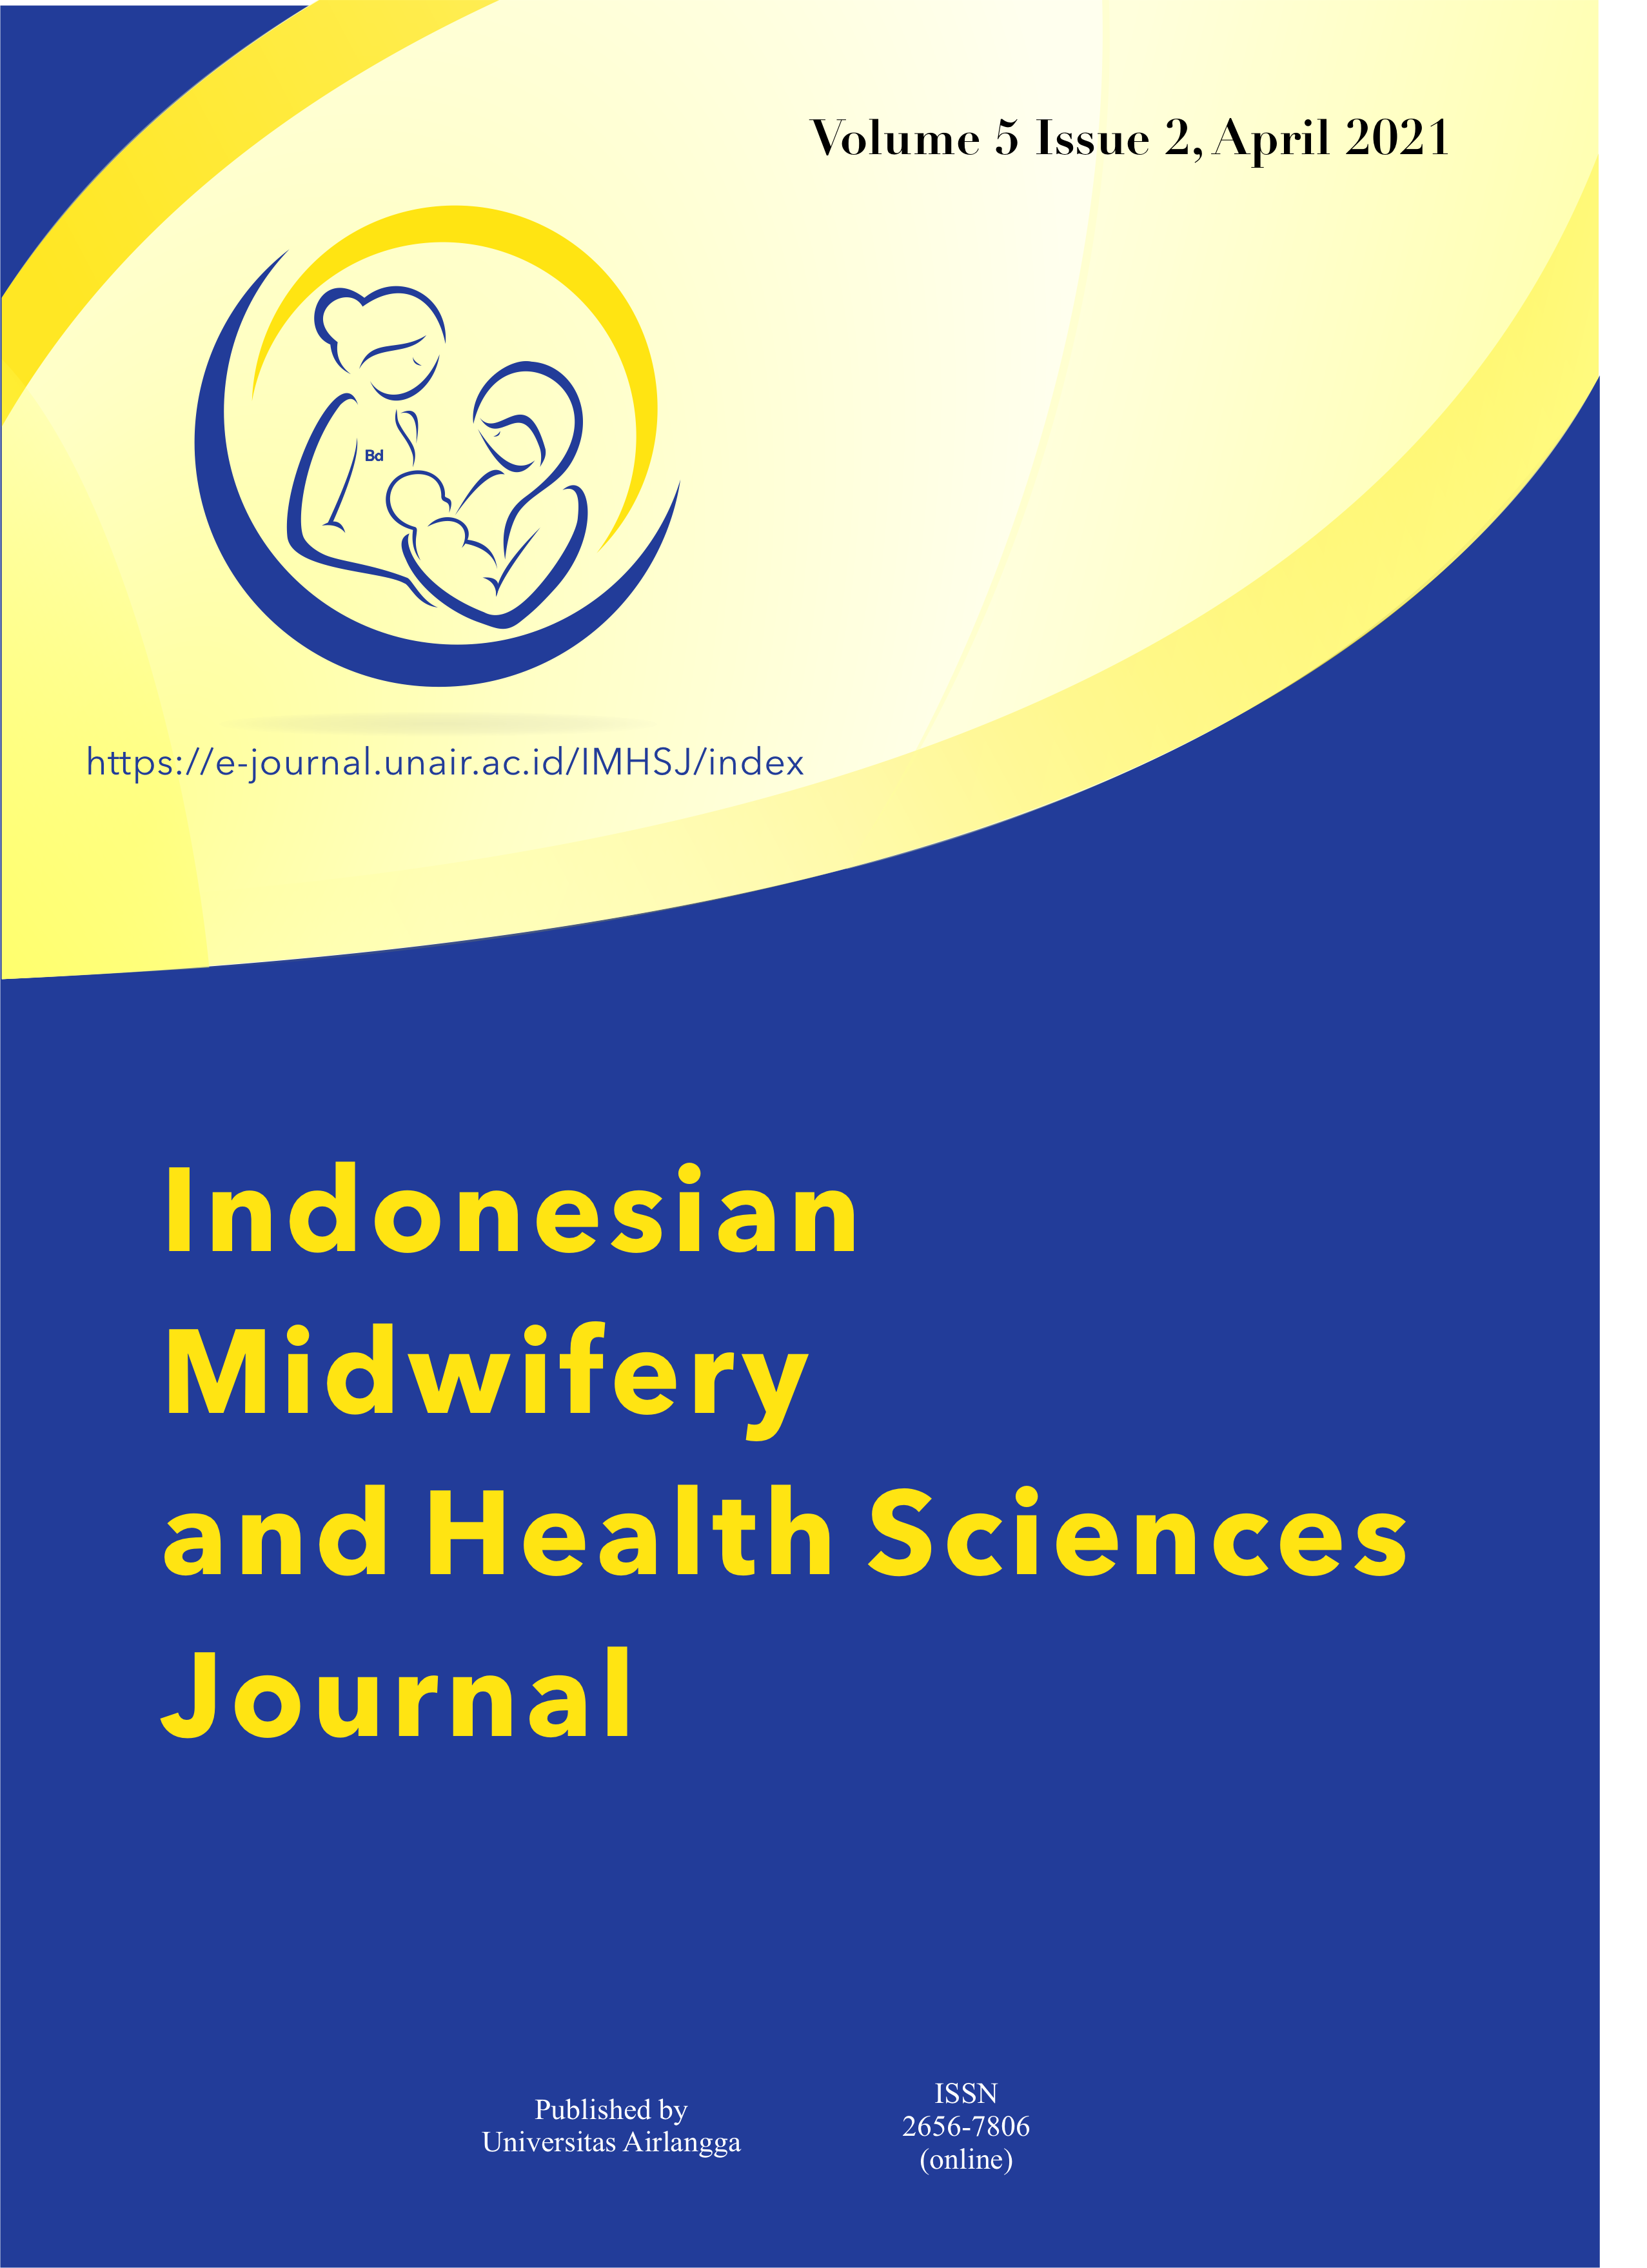 						View Vol. 5 No. 2 (2021): Indonesian Midwifery and Health Sciences Journal, April 2021
					